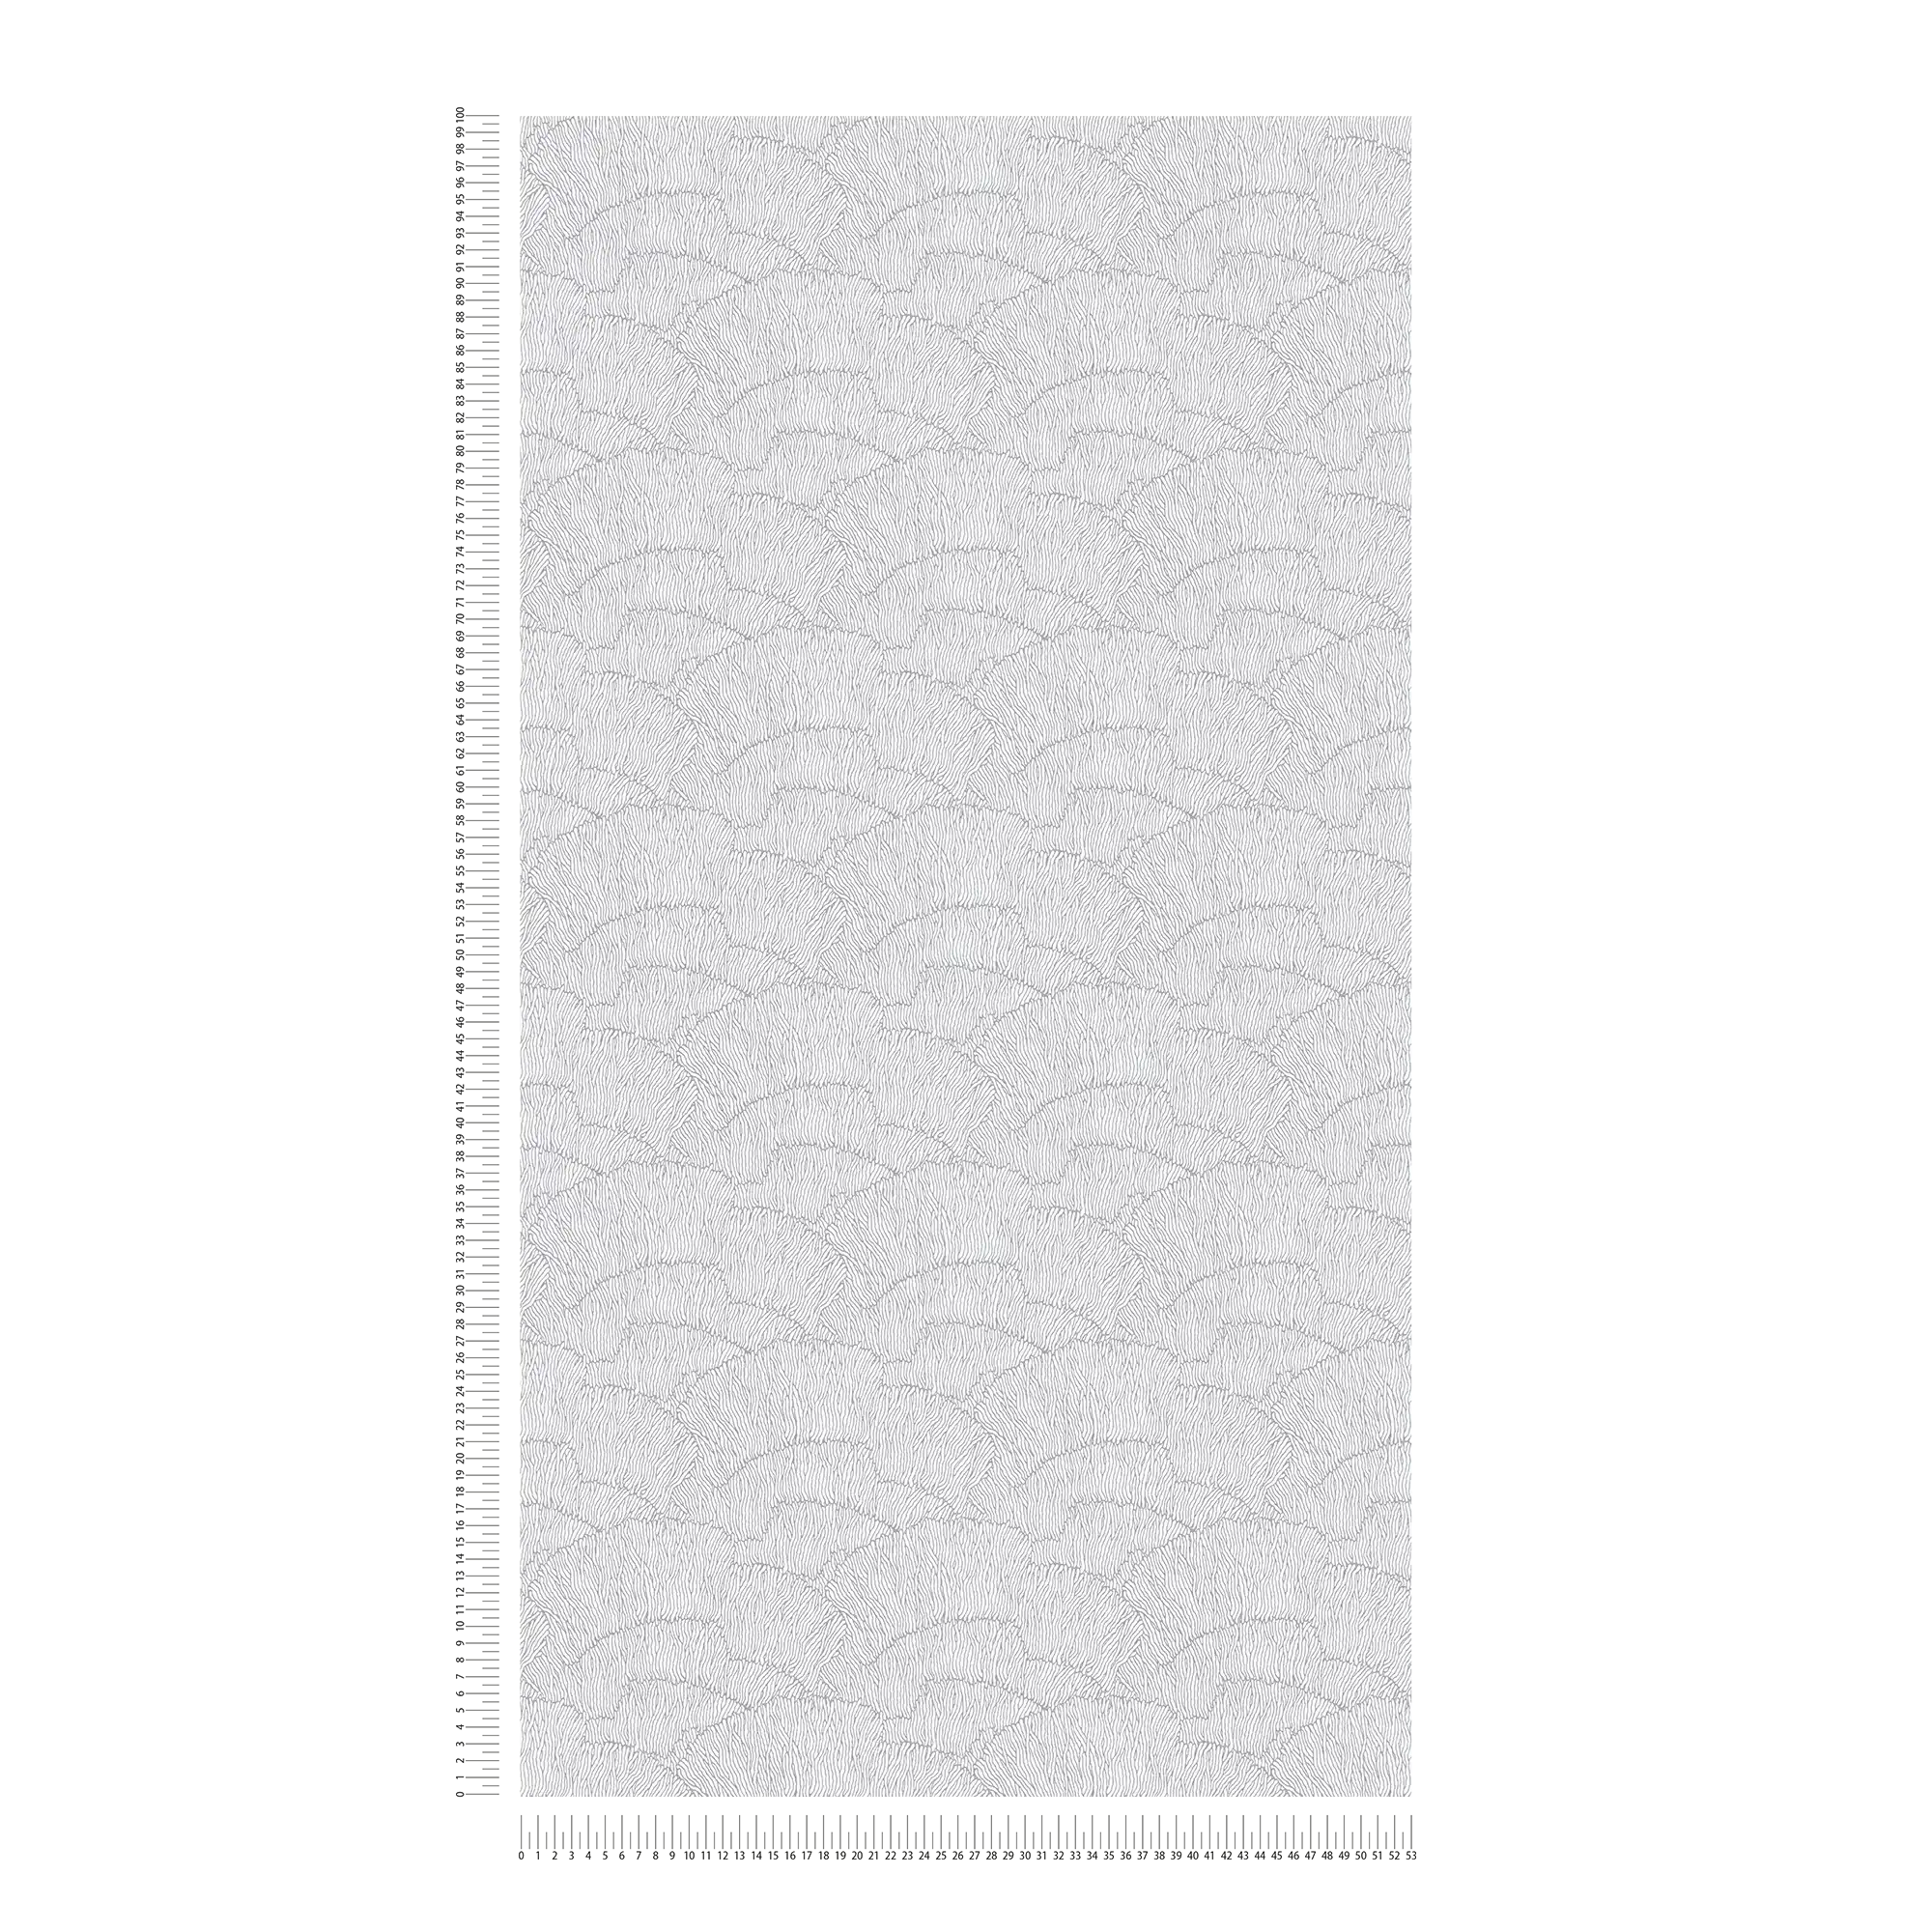             Non-woven wallpaper with abstract pattern - silver, white, metallic
        